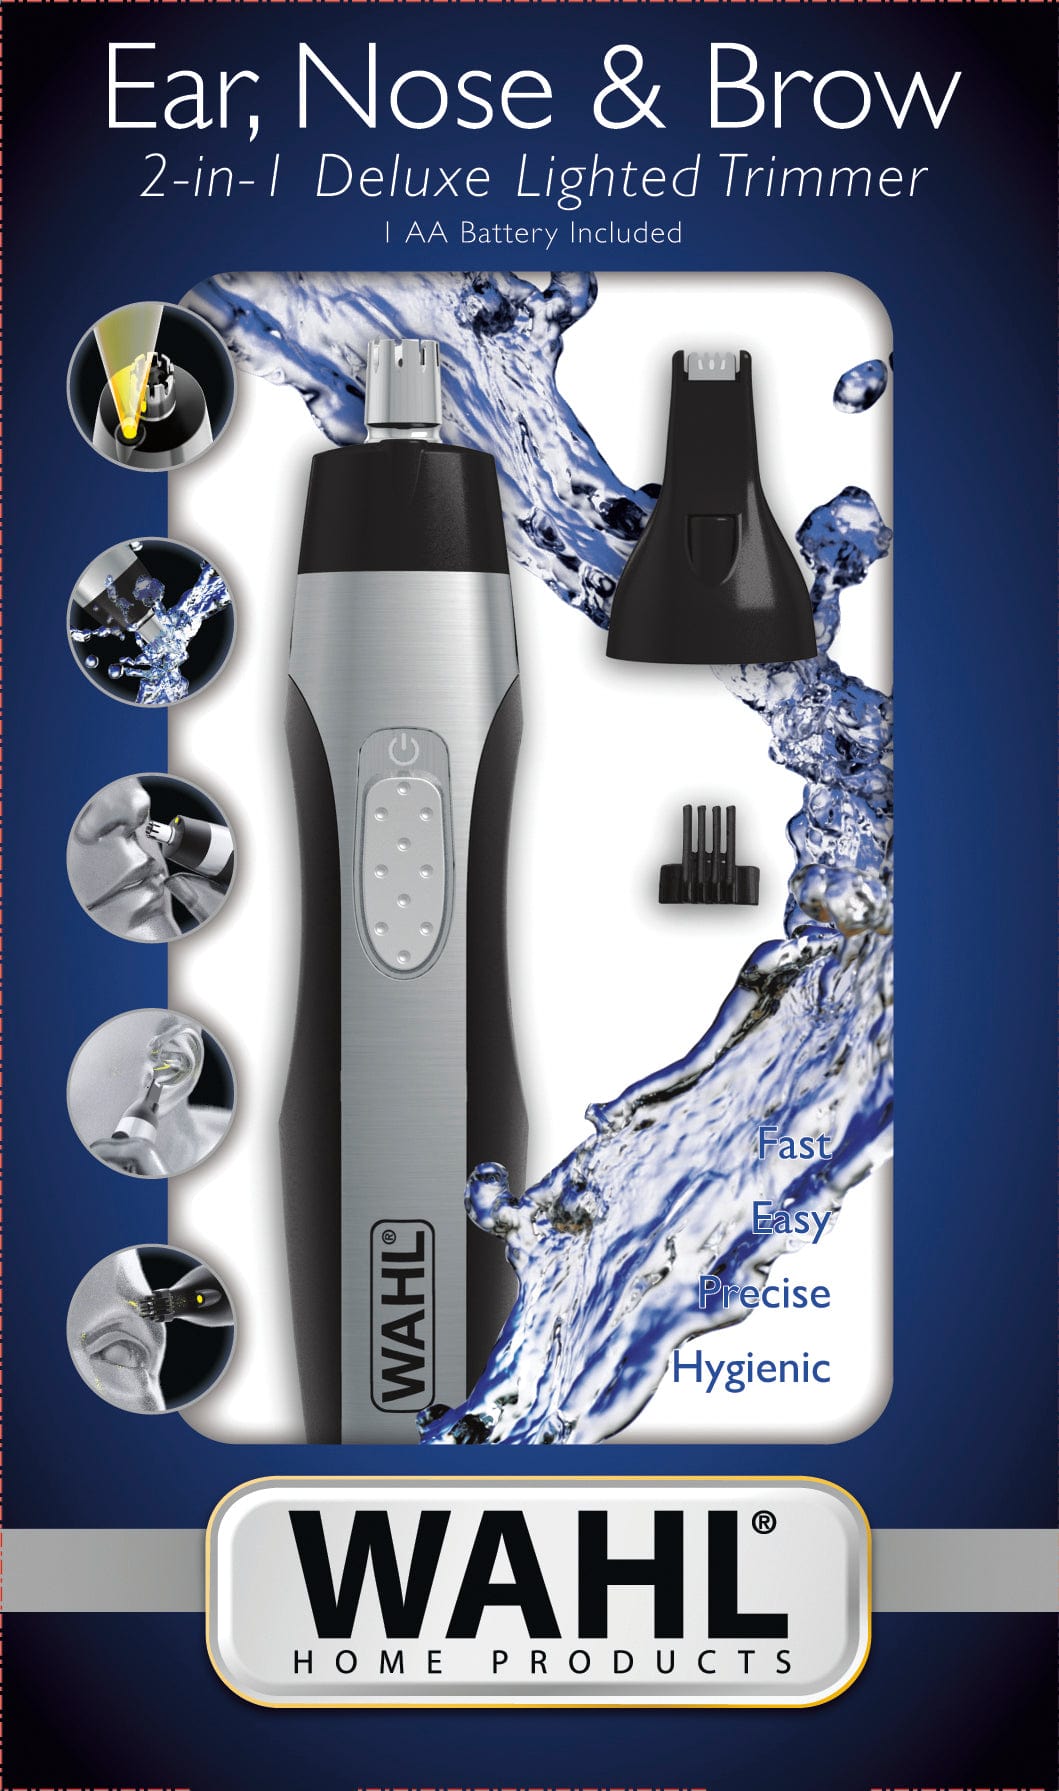 Wahl Ear Nose & Brow Battery Operated 2-In-1 Deluxe Lightedtrimmer - 5546-216